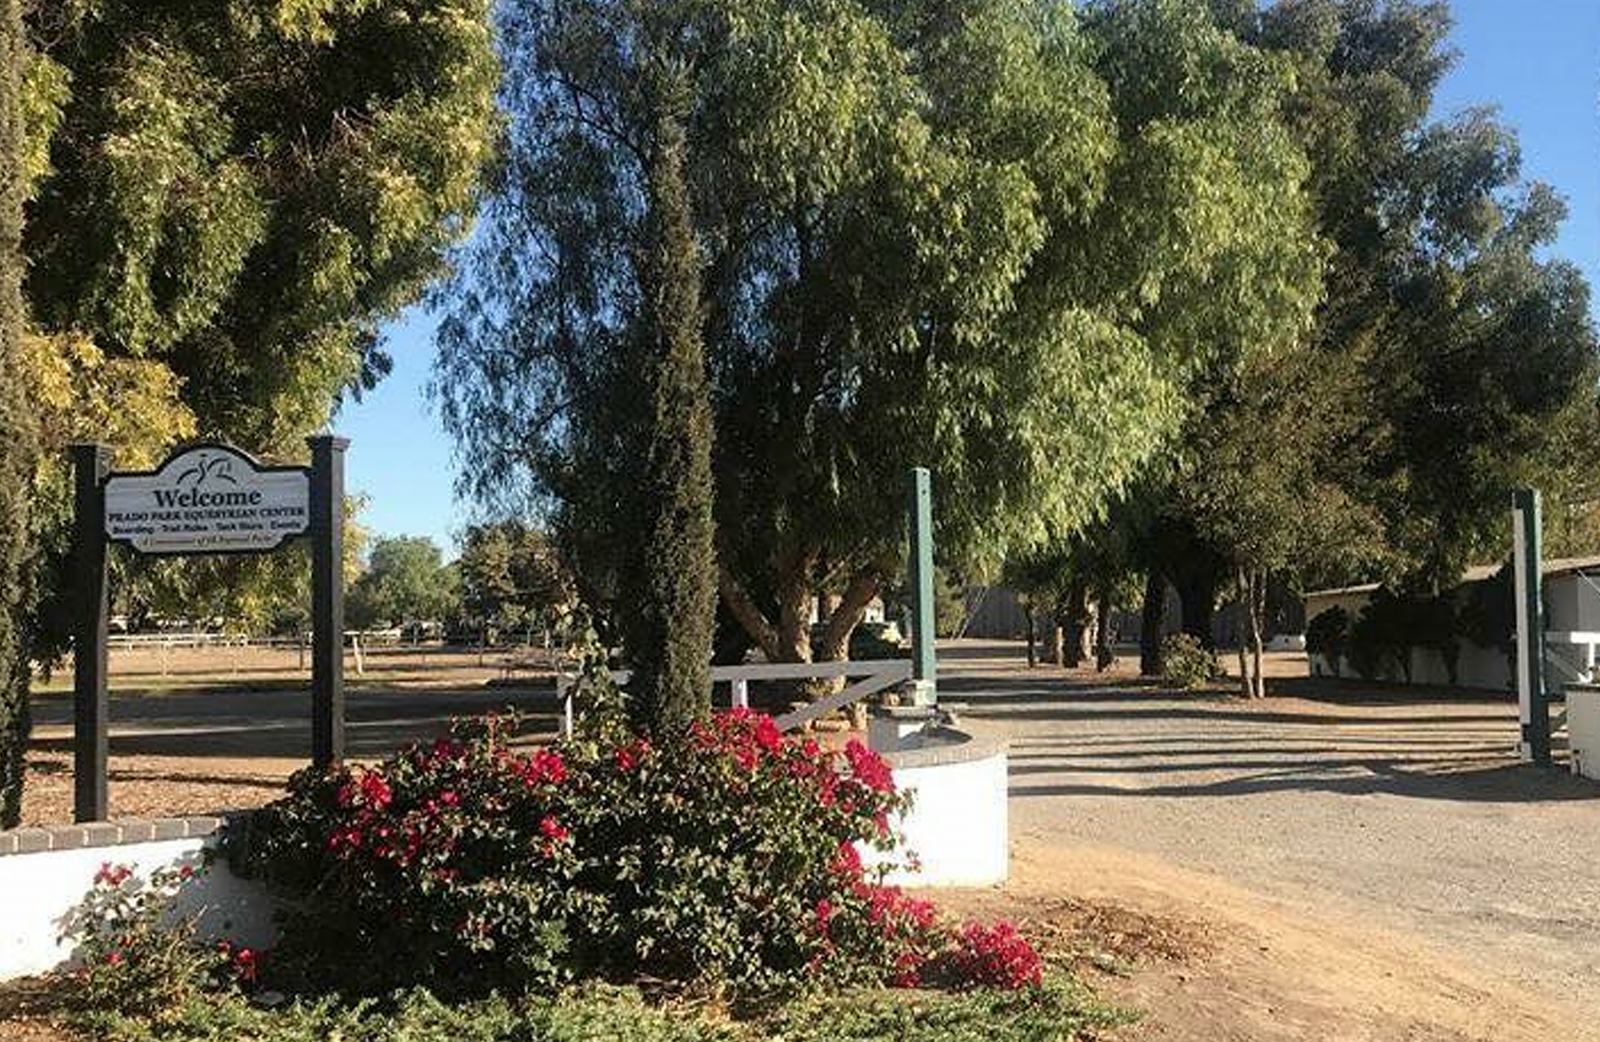 Outside Prado Equestrian Center entrance with flowers and trees.